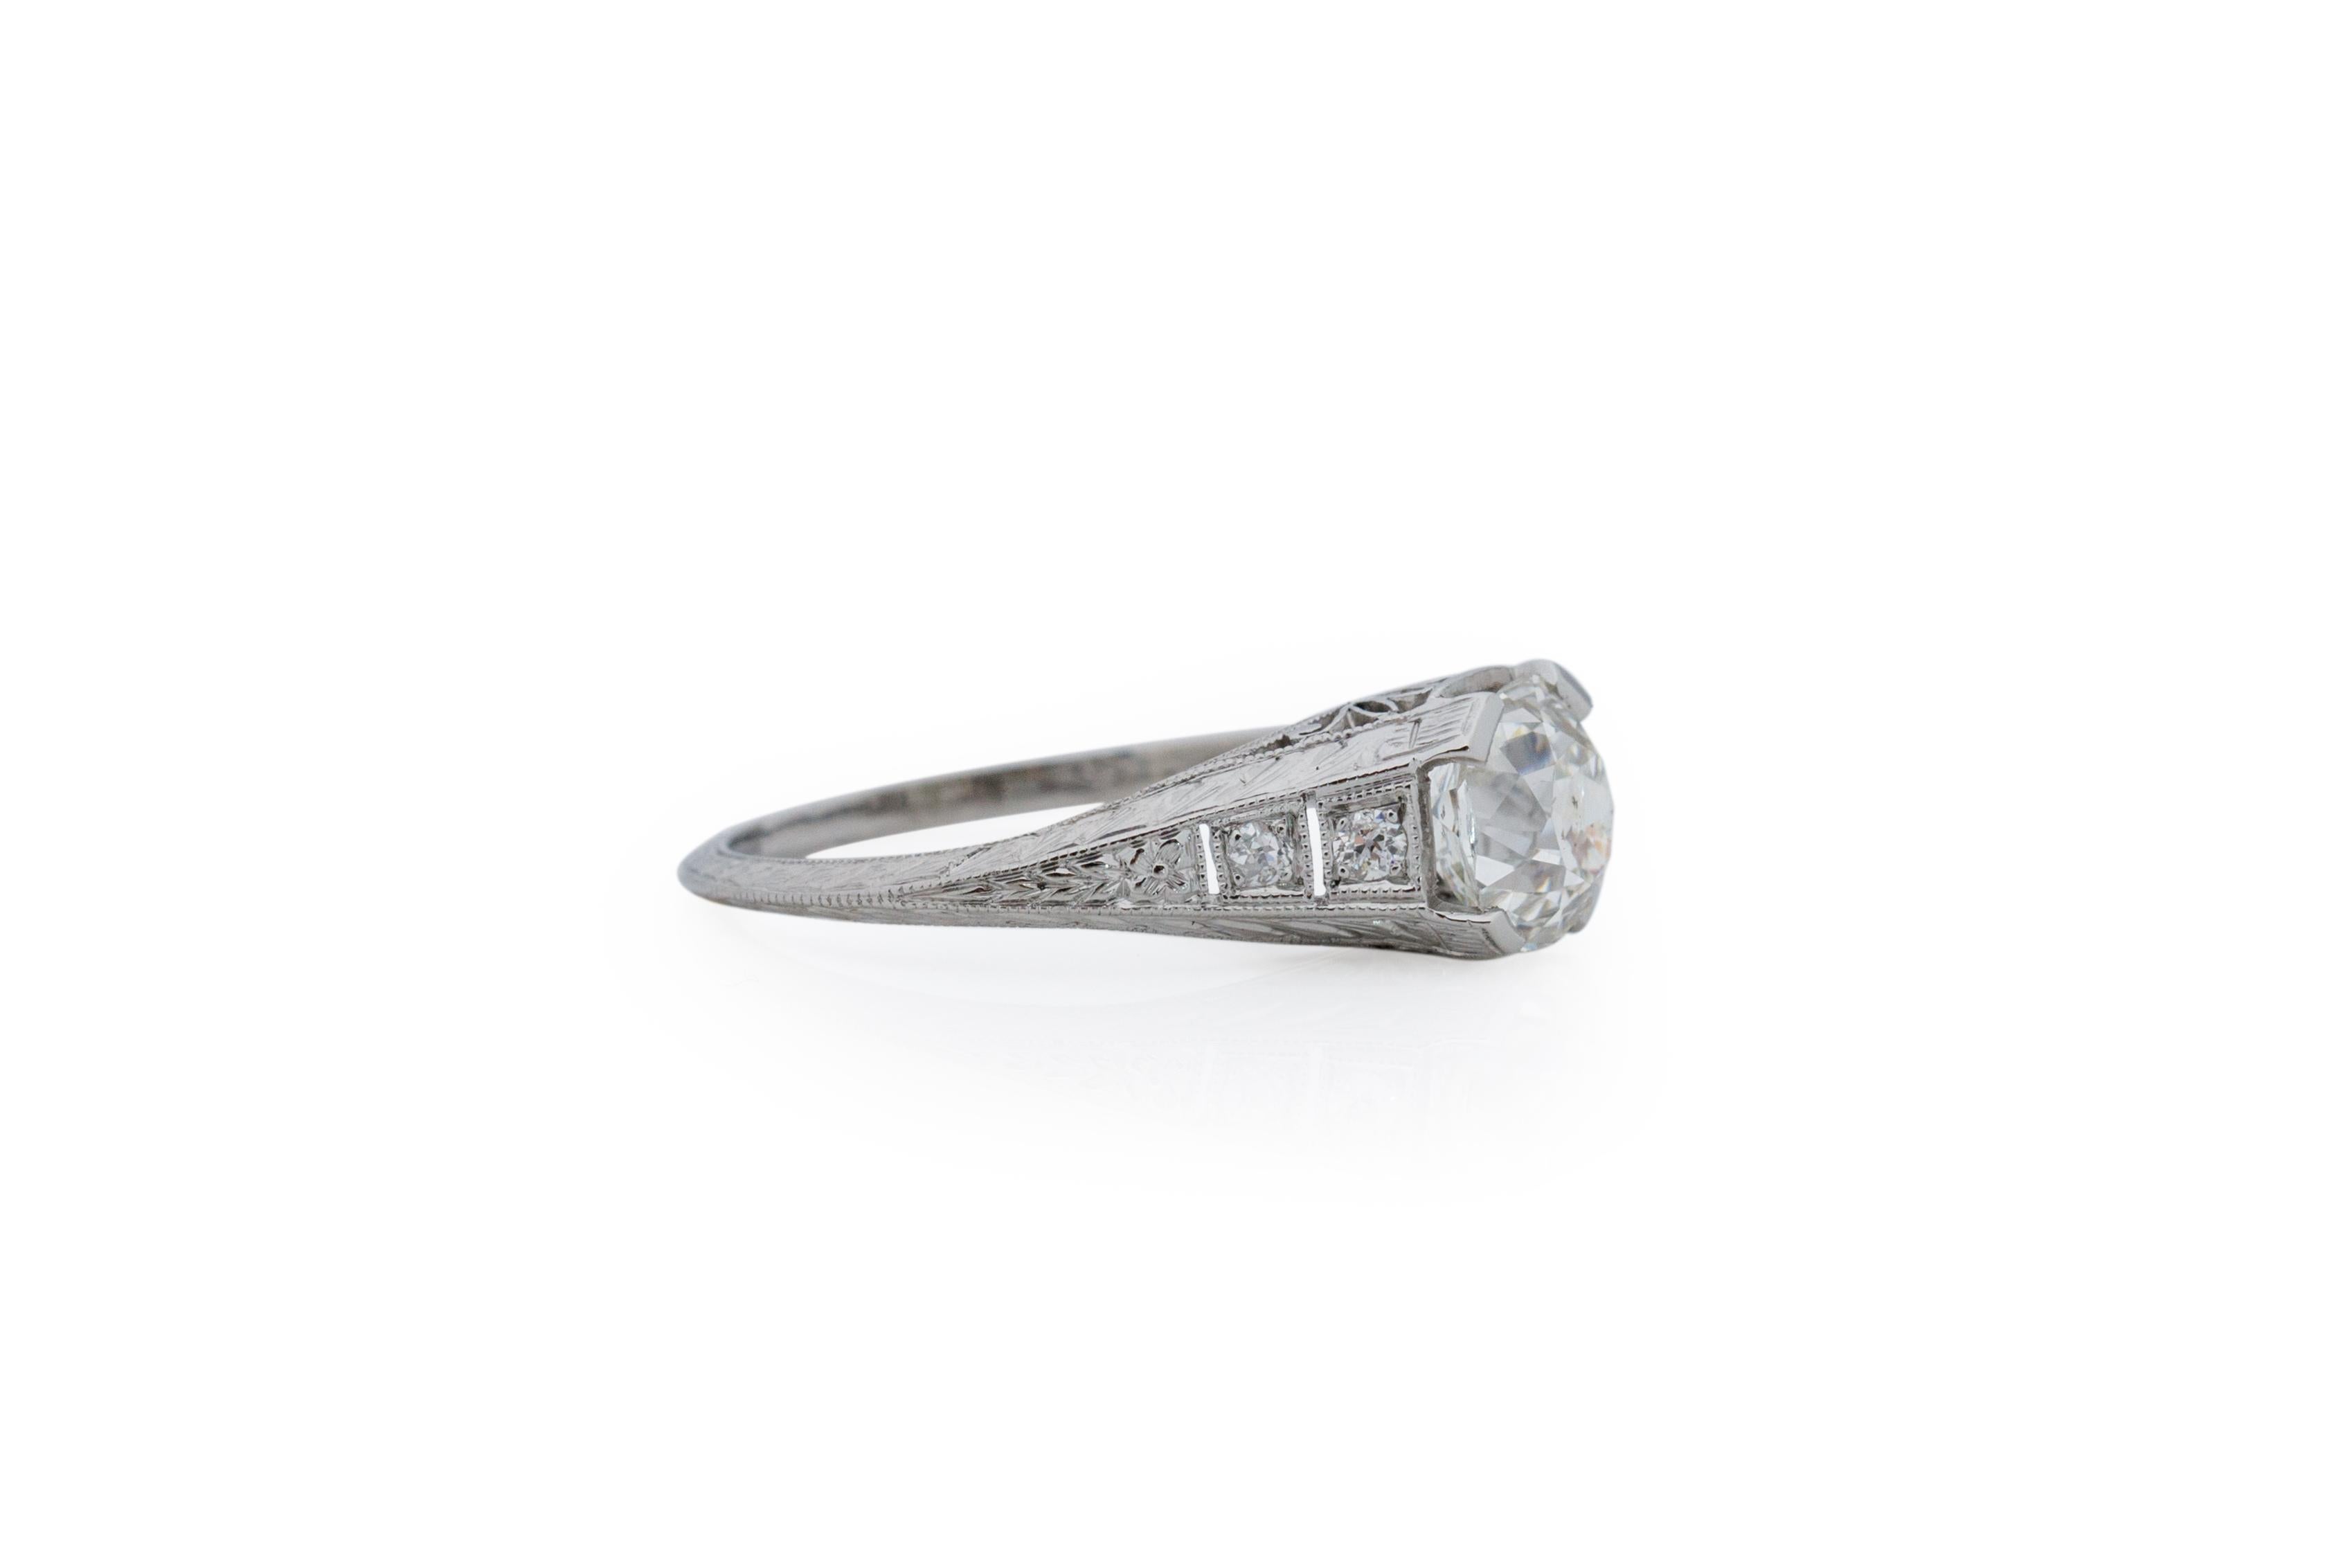 Ring Size: 6
Metal Type: Platinum [Hallmarked, and Tested]
Weight: 3.5 grams

Center Diamond Details:
GIA REPORT #: 2195298984
Weight: 1.48 carat
Cut: Antique Cushion
Color: I
Clarity: SI1
Measurements: 6.62mm x 6.61mm x 4.73mm

Side Stone